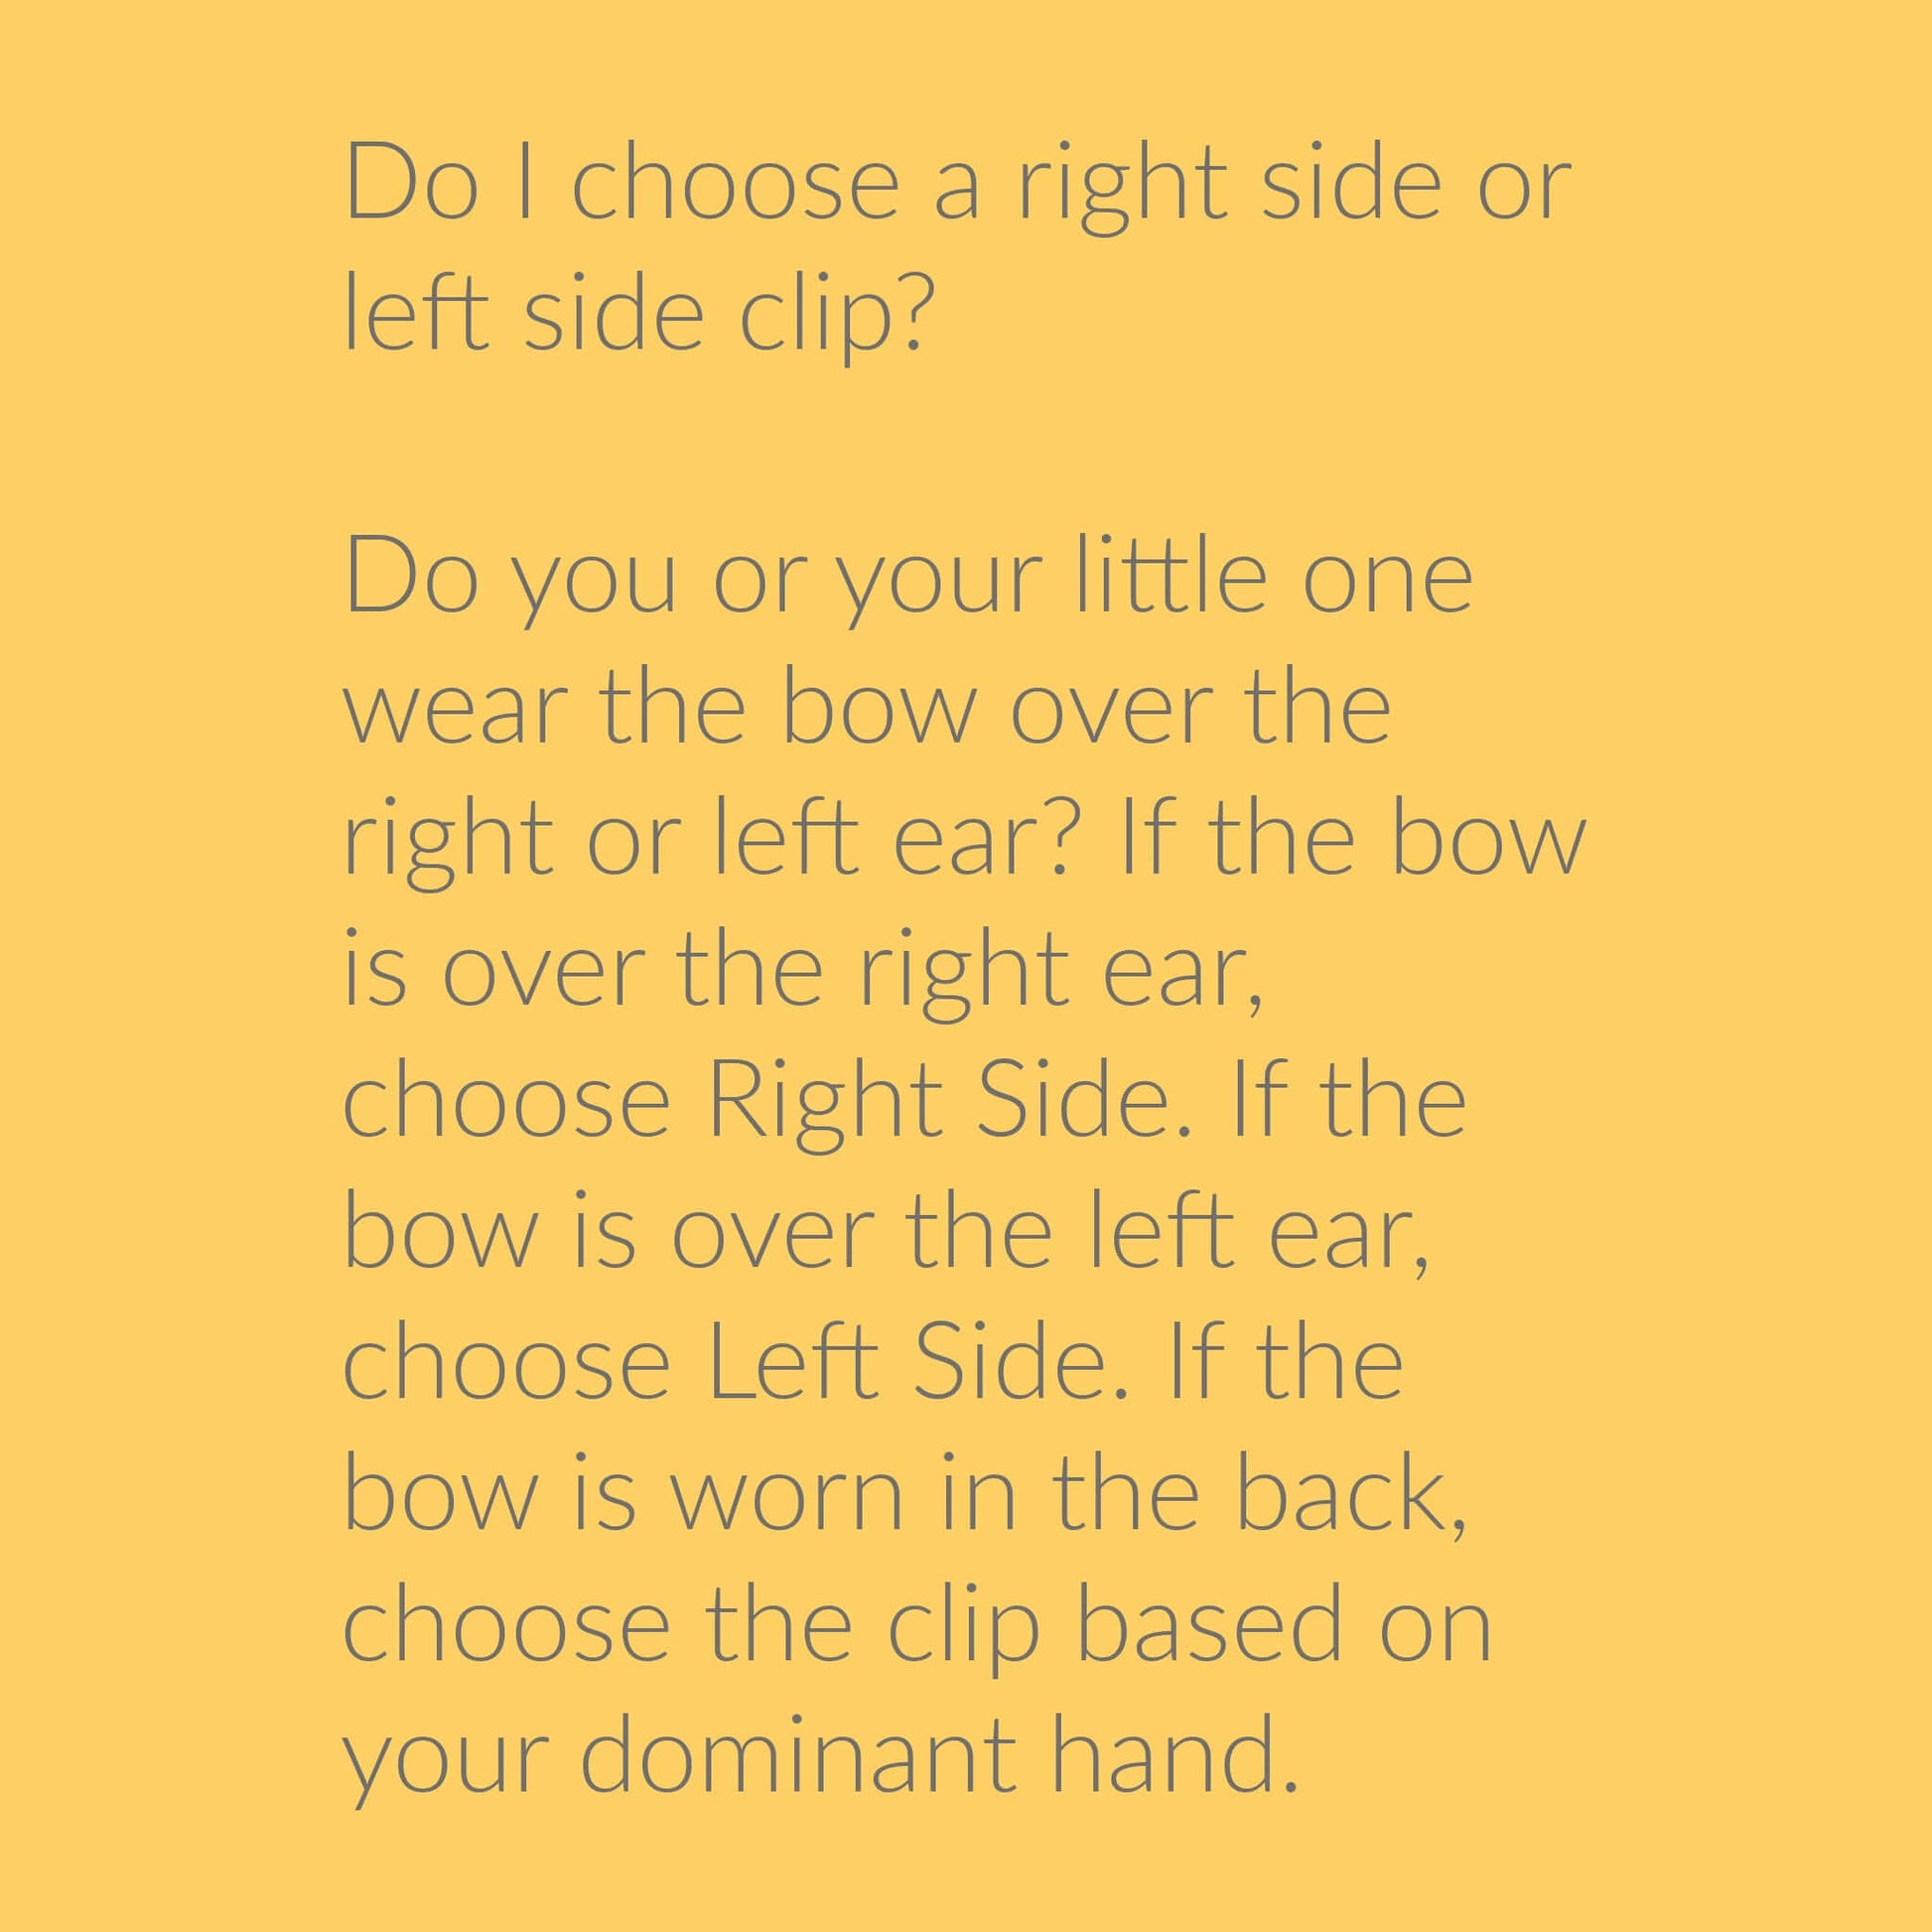 Instructions on choosing a right or left side clip for hair bows based on ear placement or dominant hand.